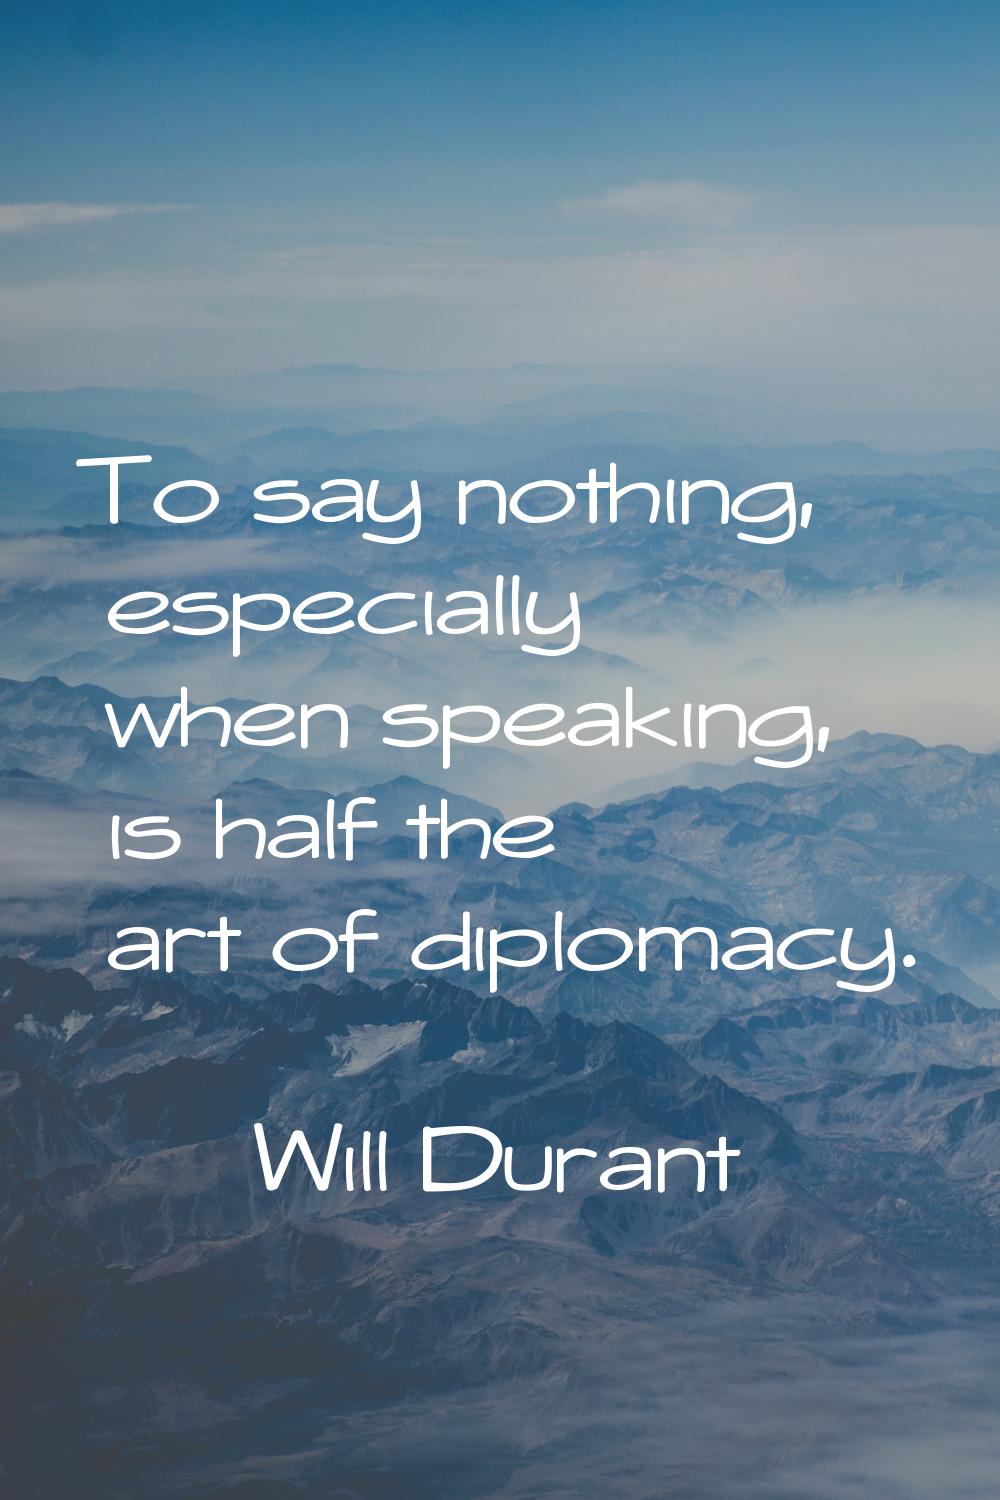 To say nothing, especially when speaking, is half the art of diplomacy.